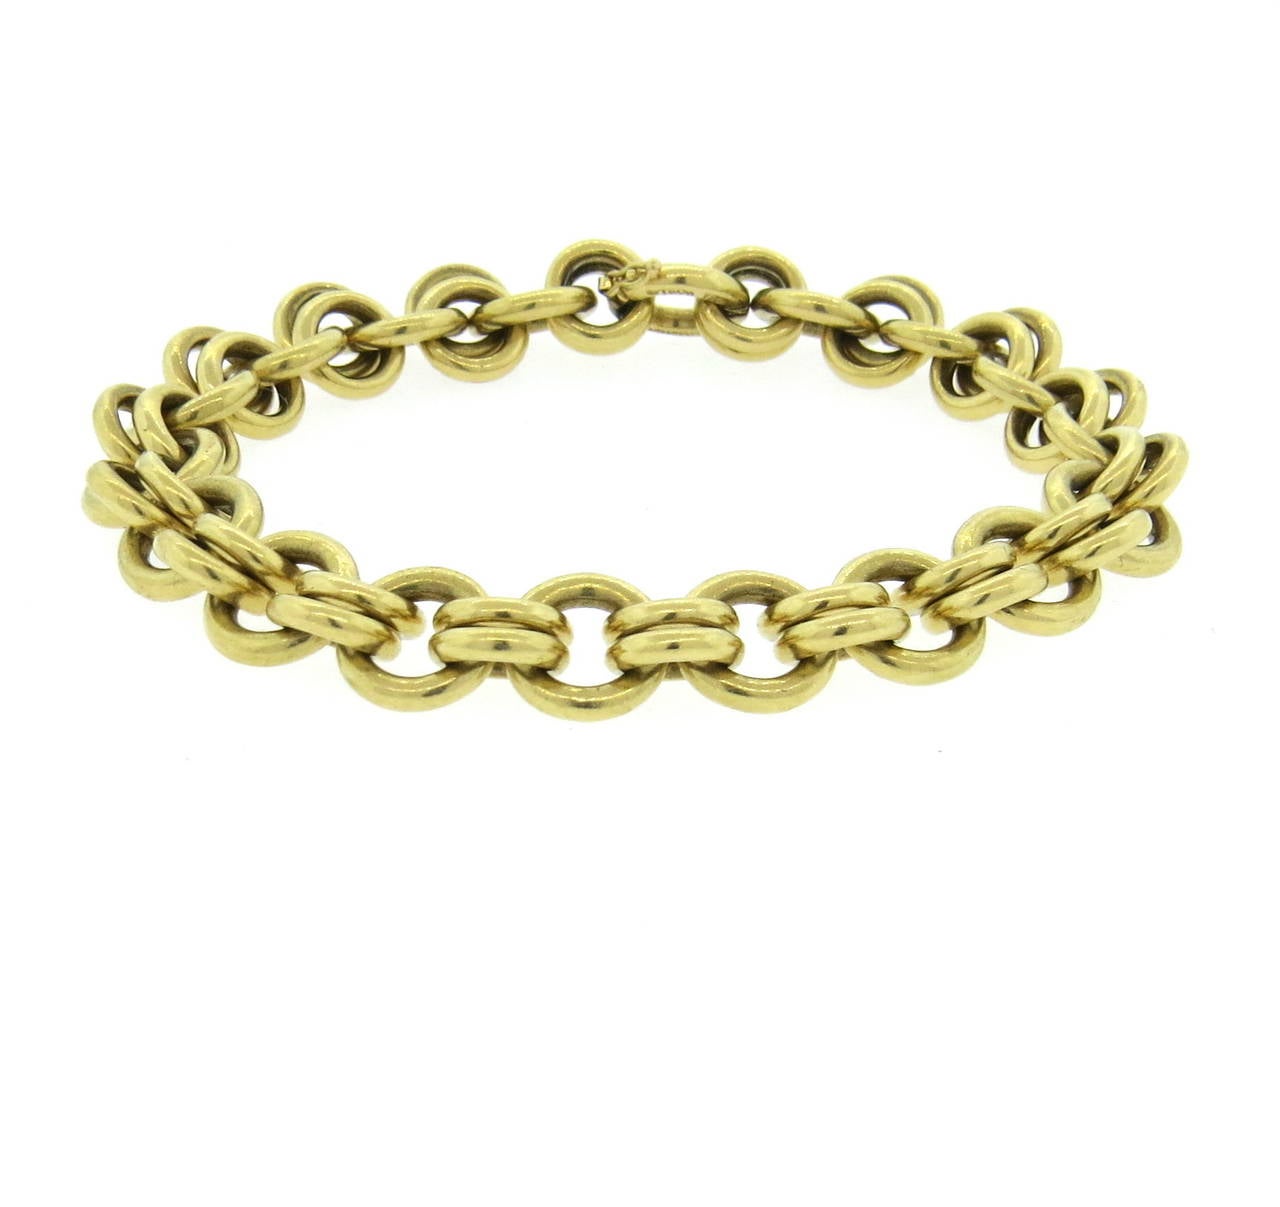 An 18k yellow gold bracelet crafted by Jean Schlumberger for Tiffany & Co.  The bracelet measures 7.25